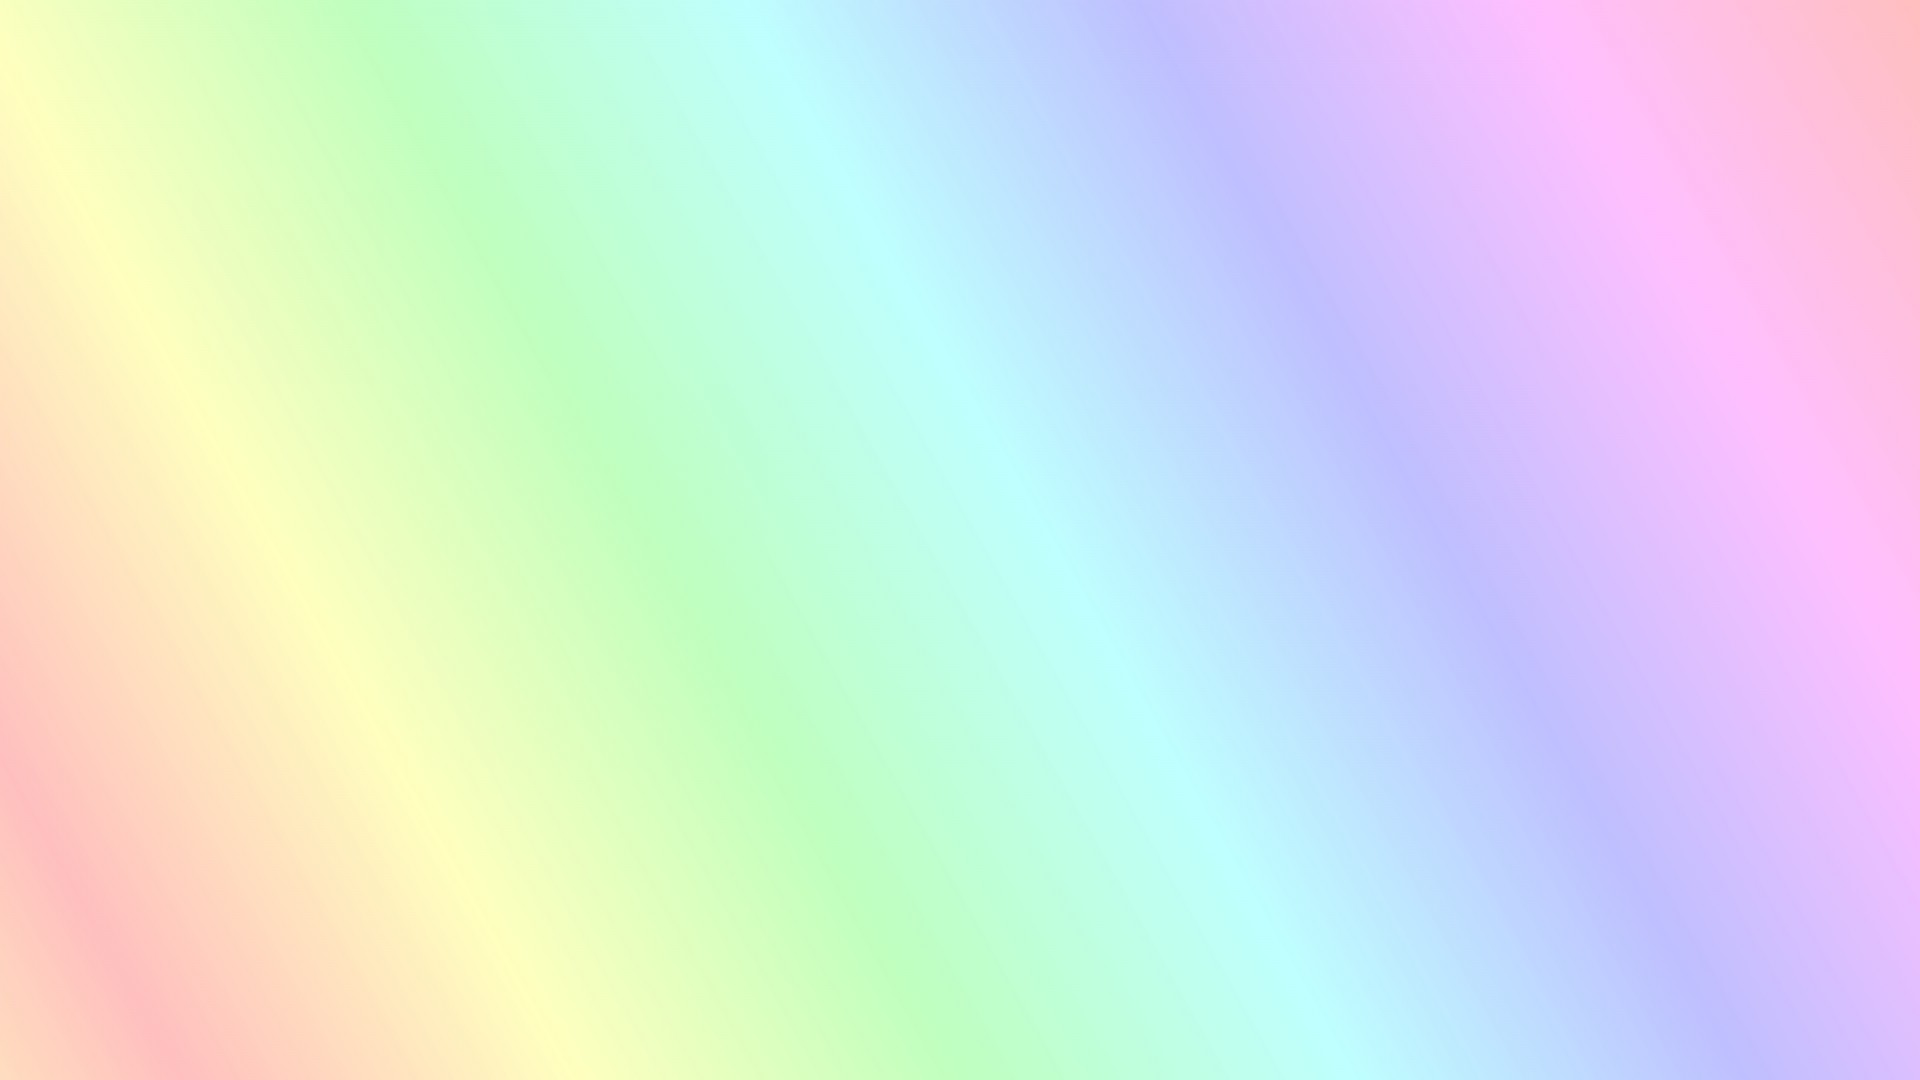 Multi,color,pastel,pastels,colors - free image from 